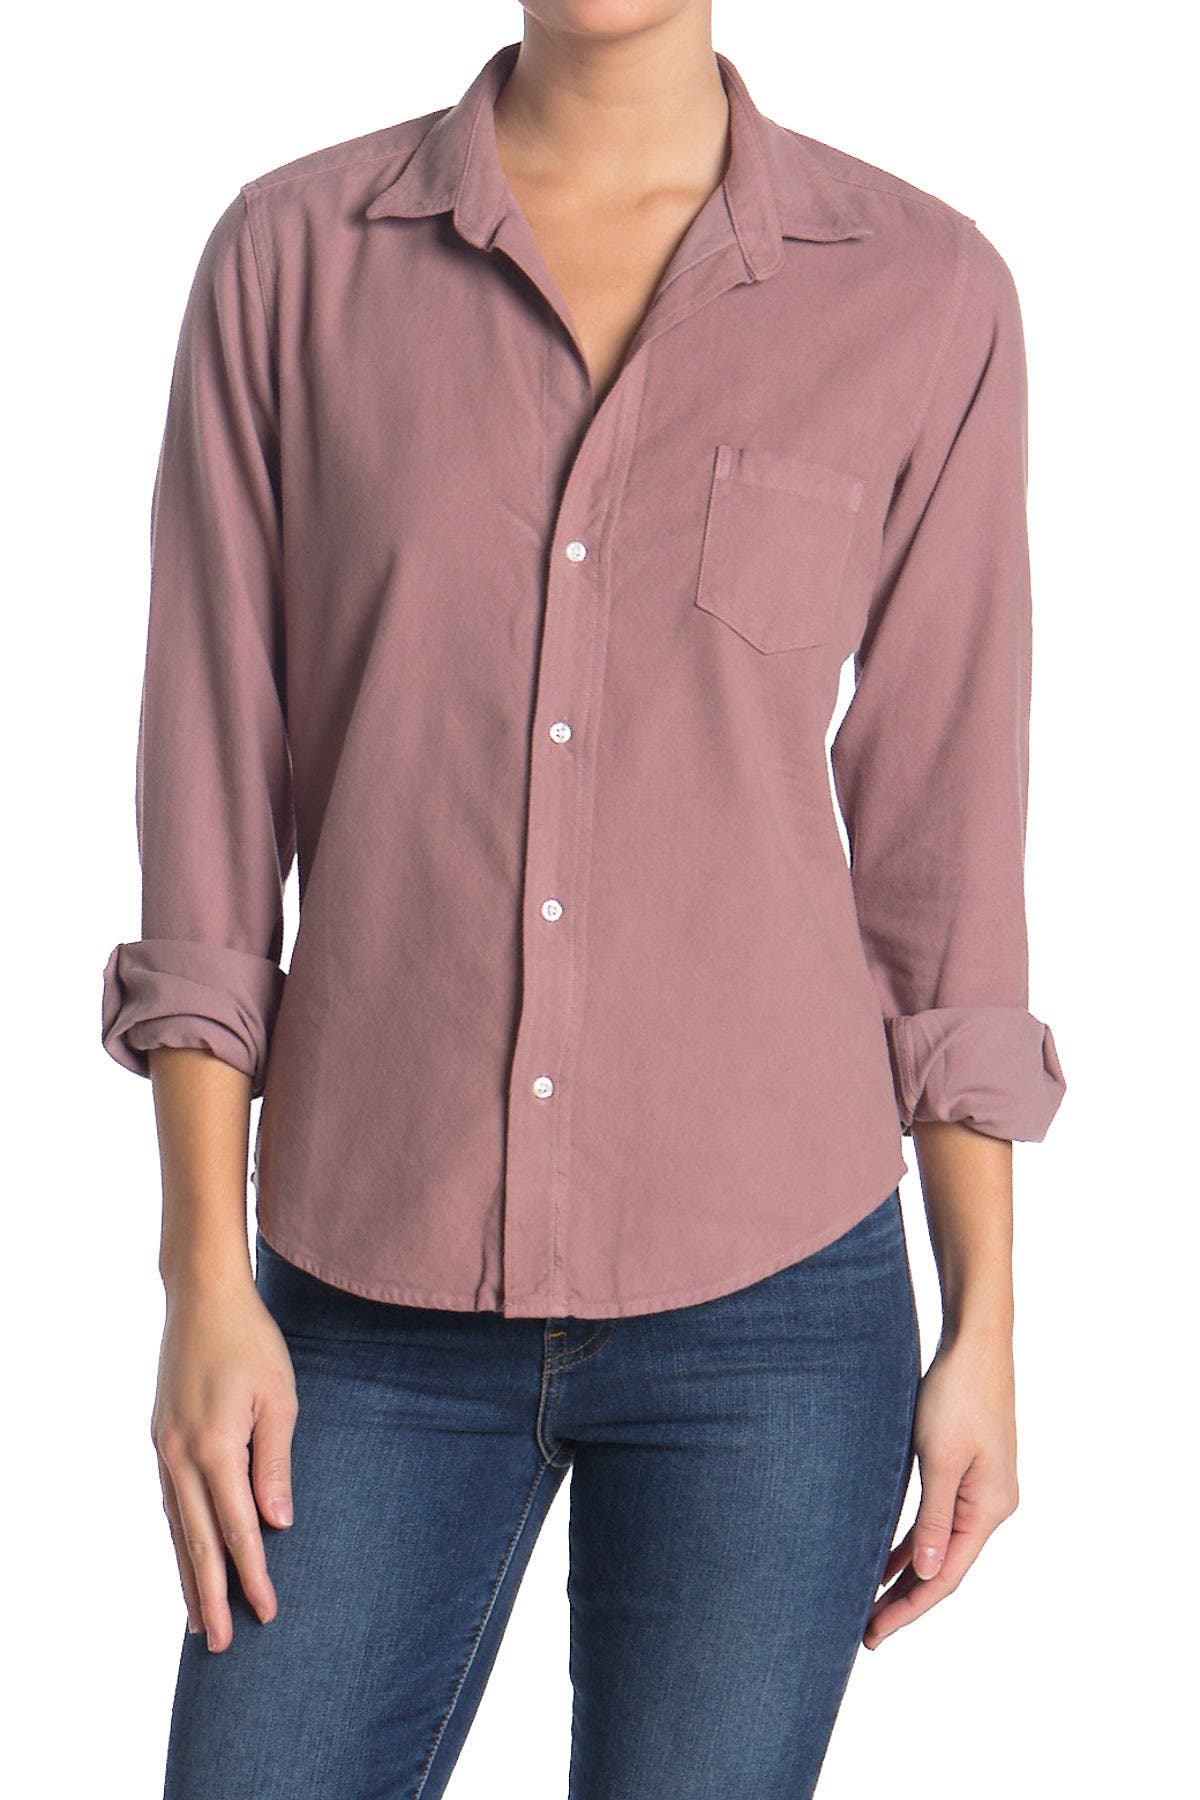 Frank Eileen Barry Solid Classic Tailored Fit Shirt Nordstrom Rack